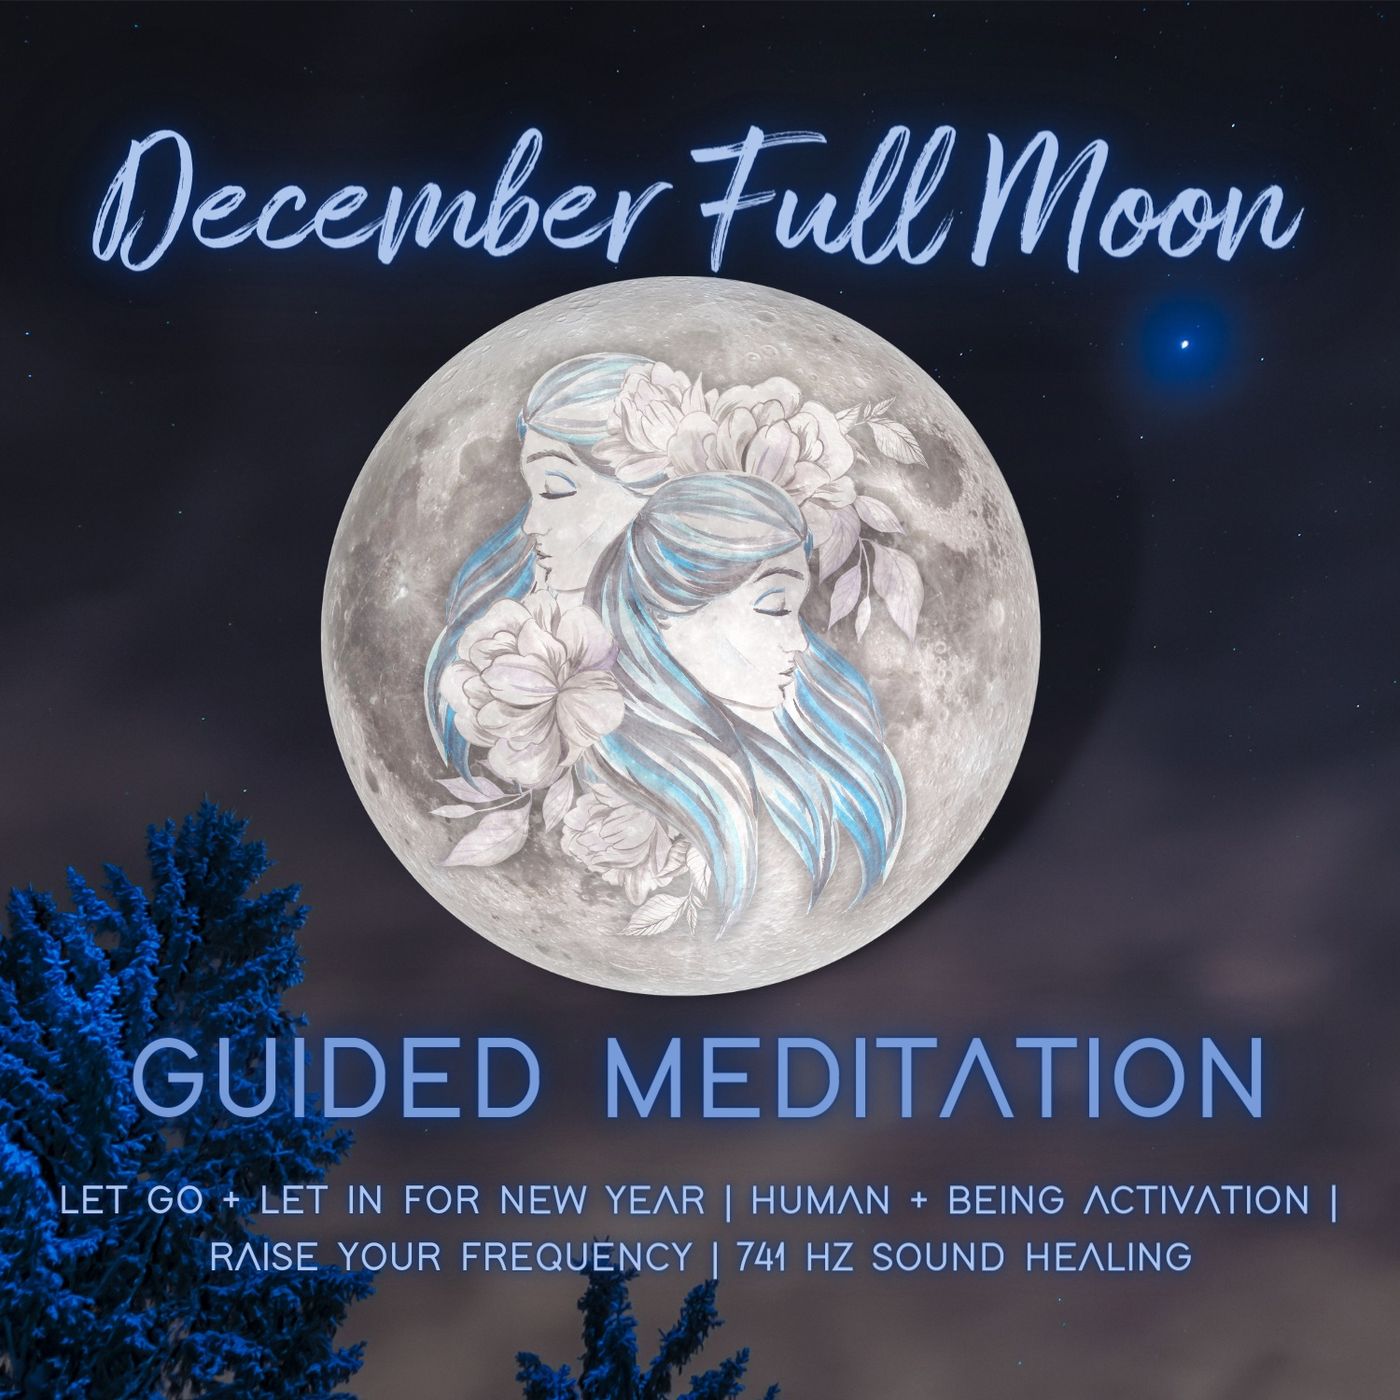 December Full Moon | Guided Meditation | Let Go to Let In For New Year | 741 Hz Healing Frequency